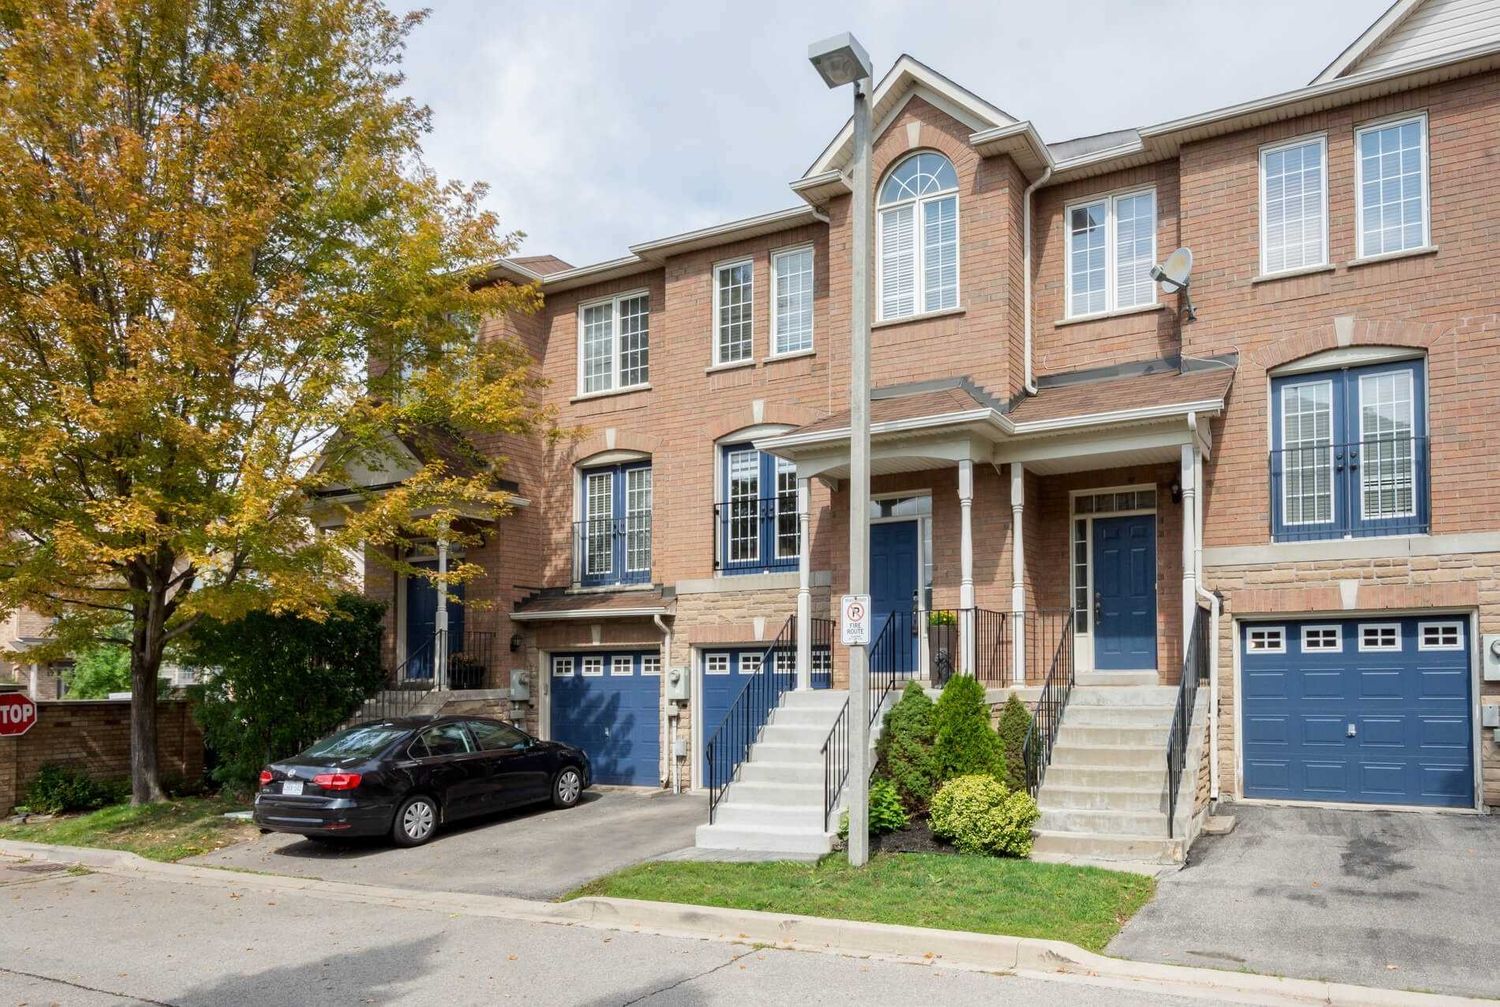 19 Foxchase Avenue. 19 Foxchase Avenue Townhomes is located in  Vaughan, Toronto - image #2 of 2